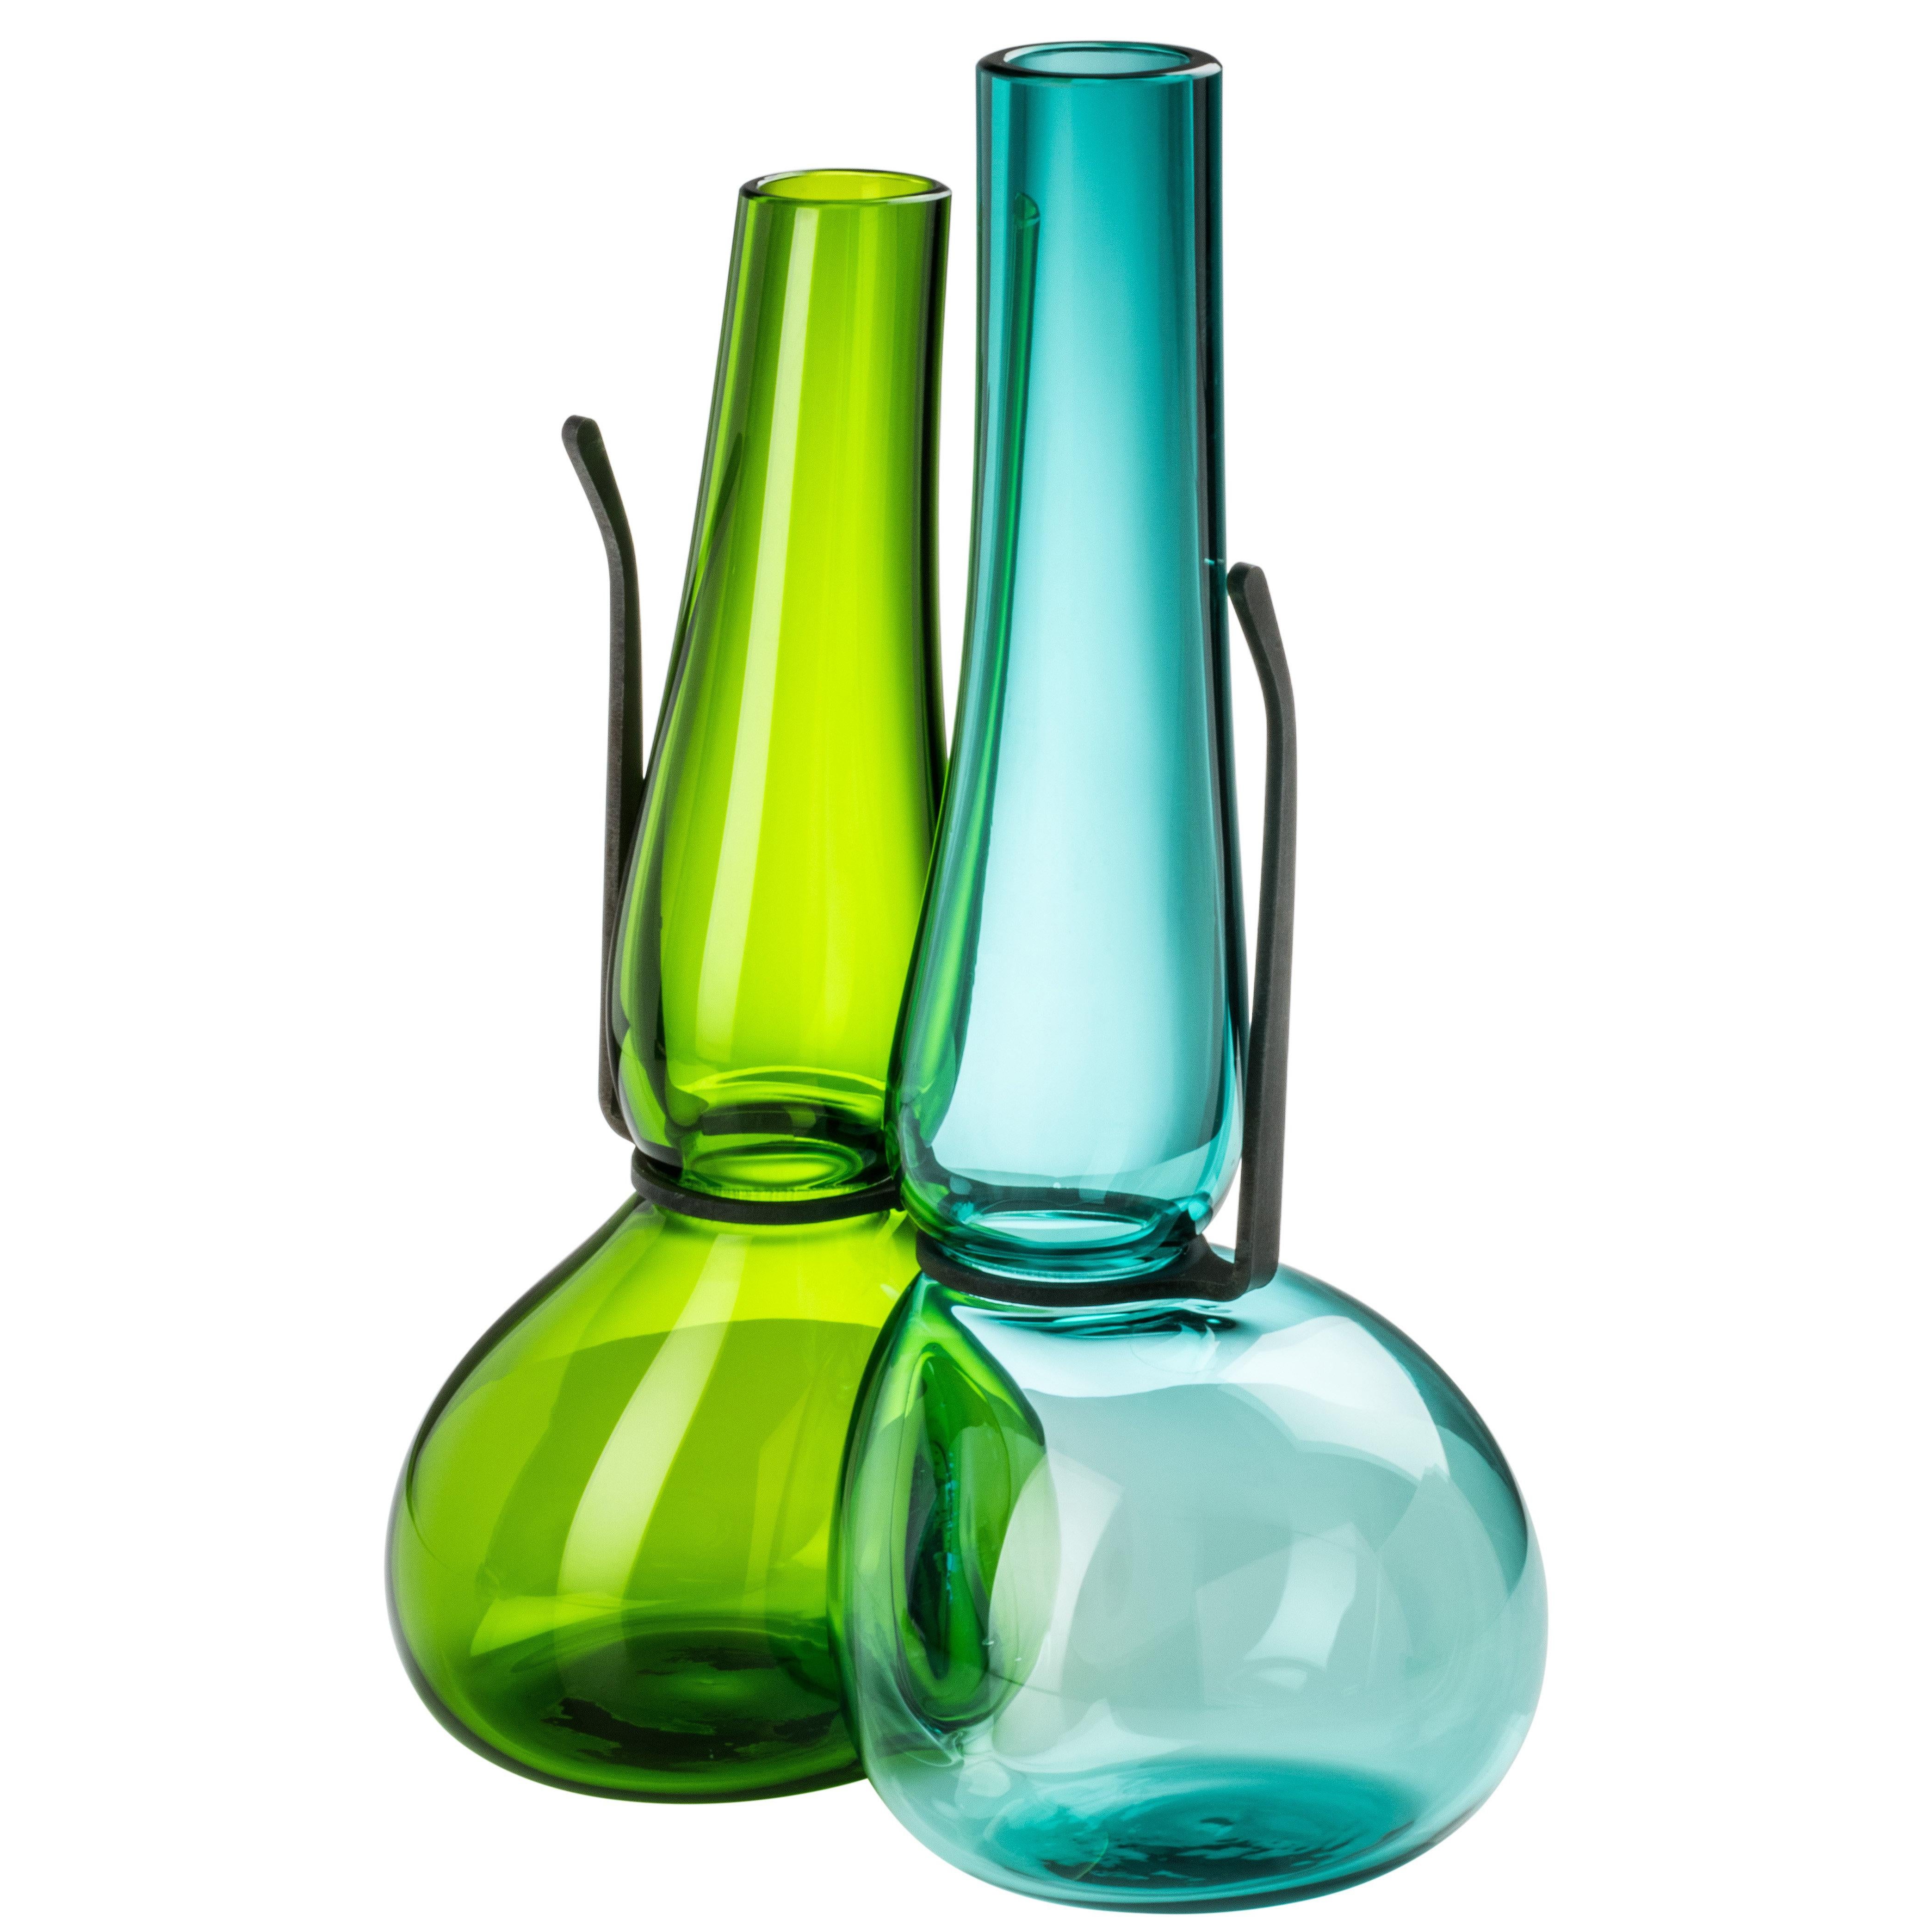 Venini 'Where Are My Glasses?' Double Lens Vase in Mint and Green by Ron Arad For Sale